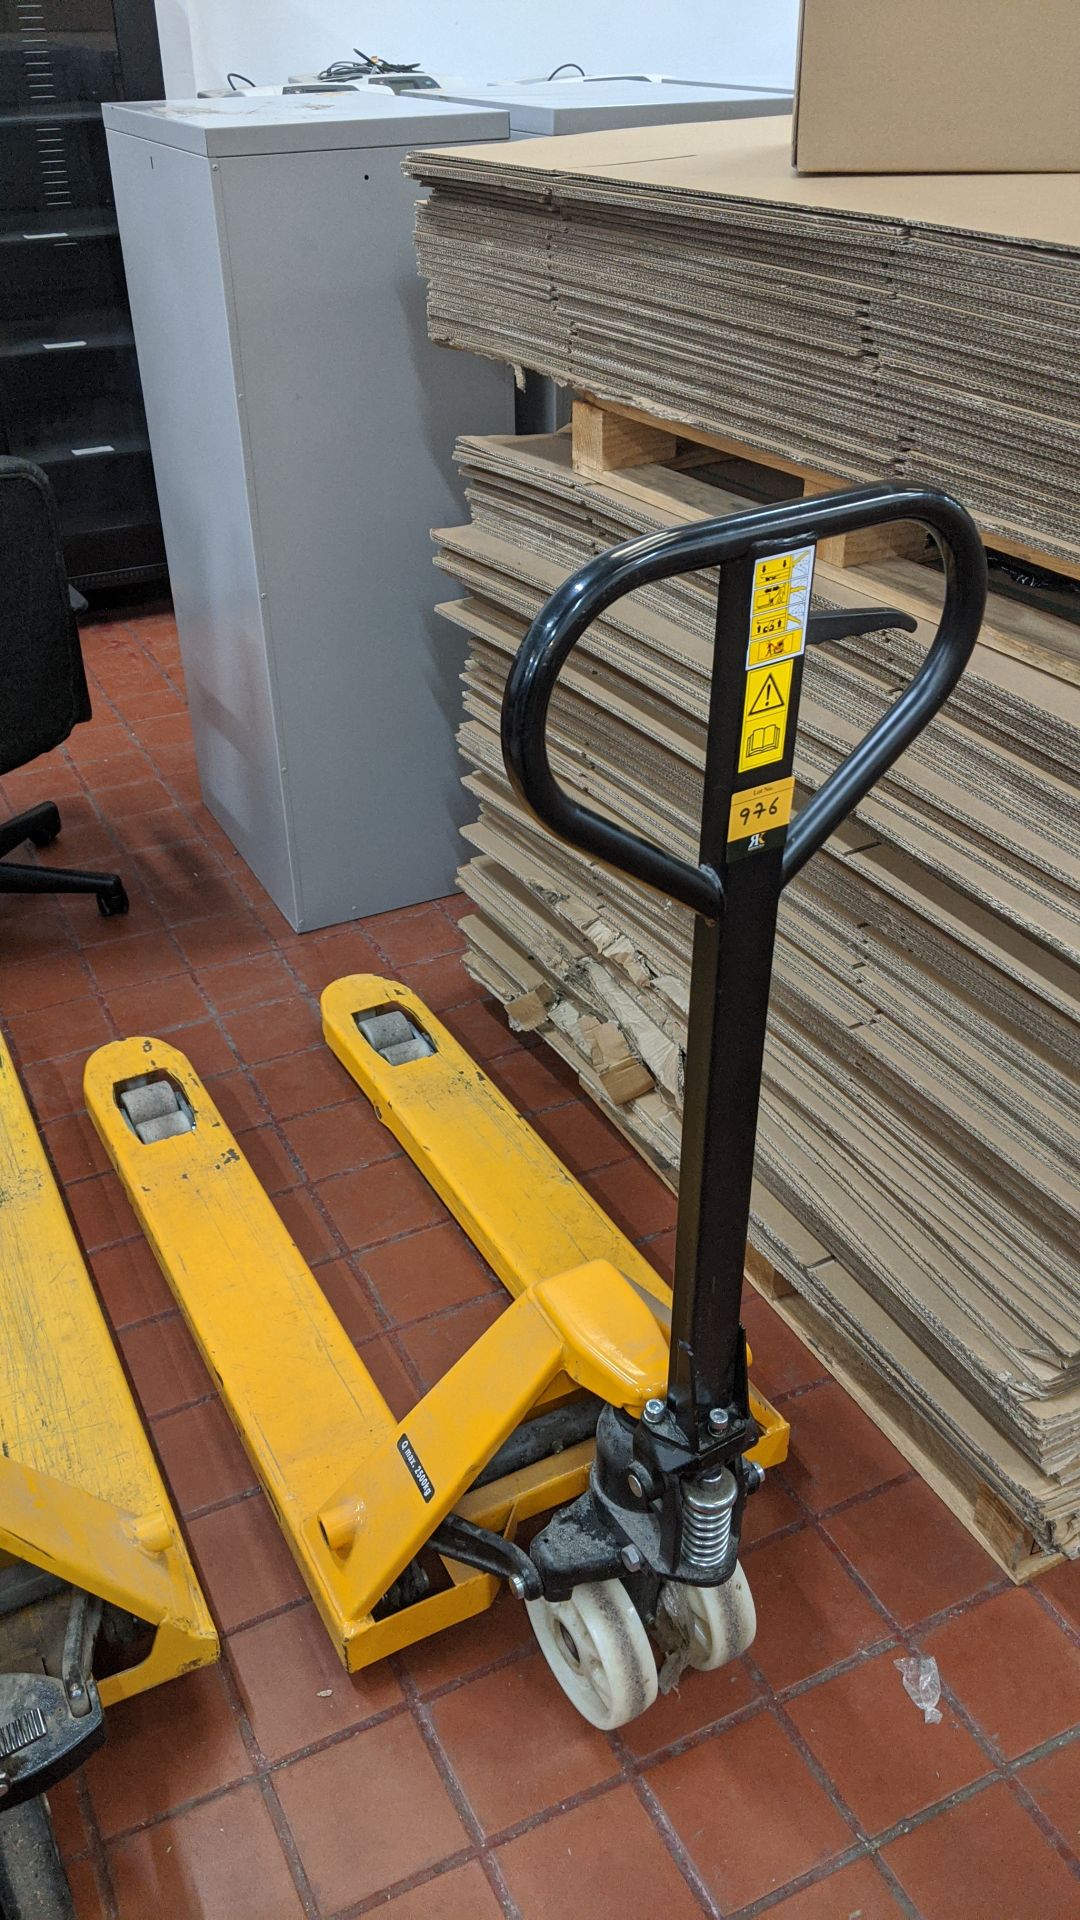 Euro pallet truck, 2500kg capacity. This is one of a large number of lots in this sale being sold